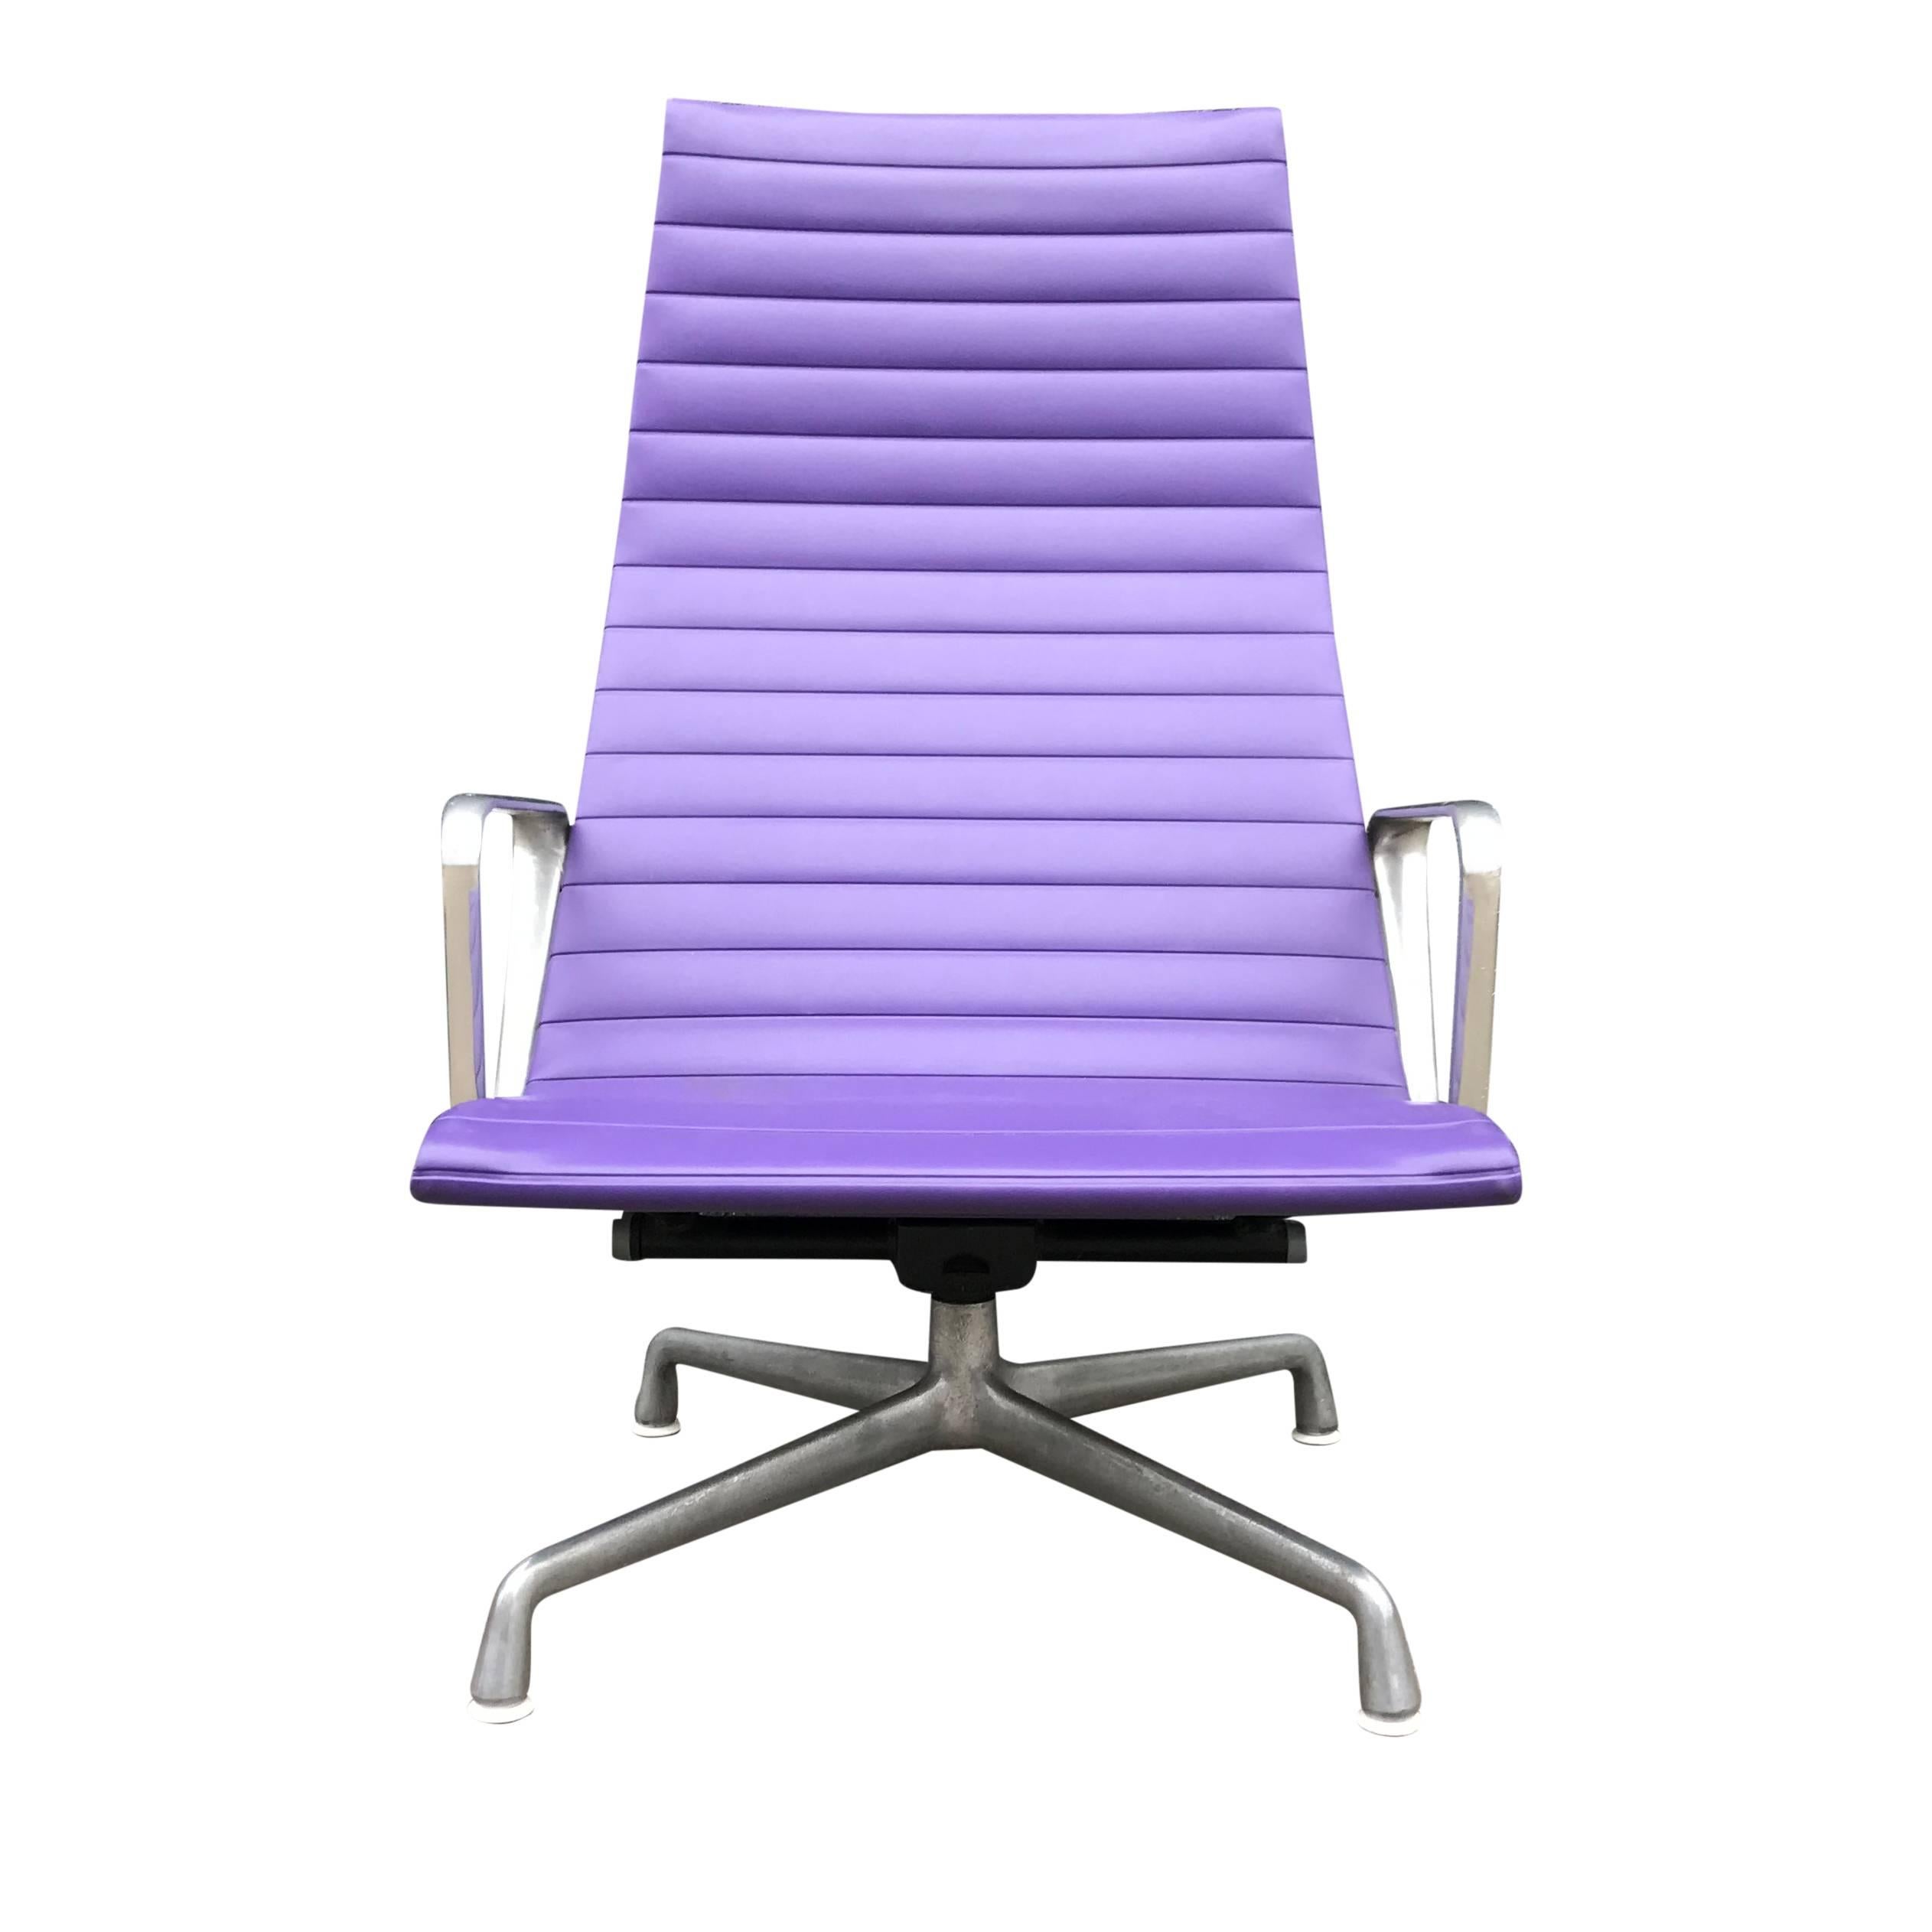 For your consideration is an Eames for Herman Miller Lounge chair, part of the Aluminum group series. 

The chair is constructed on a four-star extruded aluminium base, and features a slung ribbed vinyl seat.

An icon of Mid-Century Modern